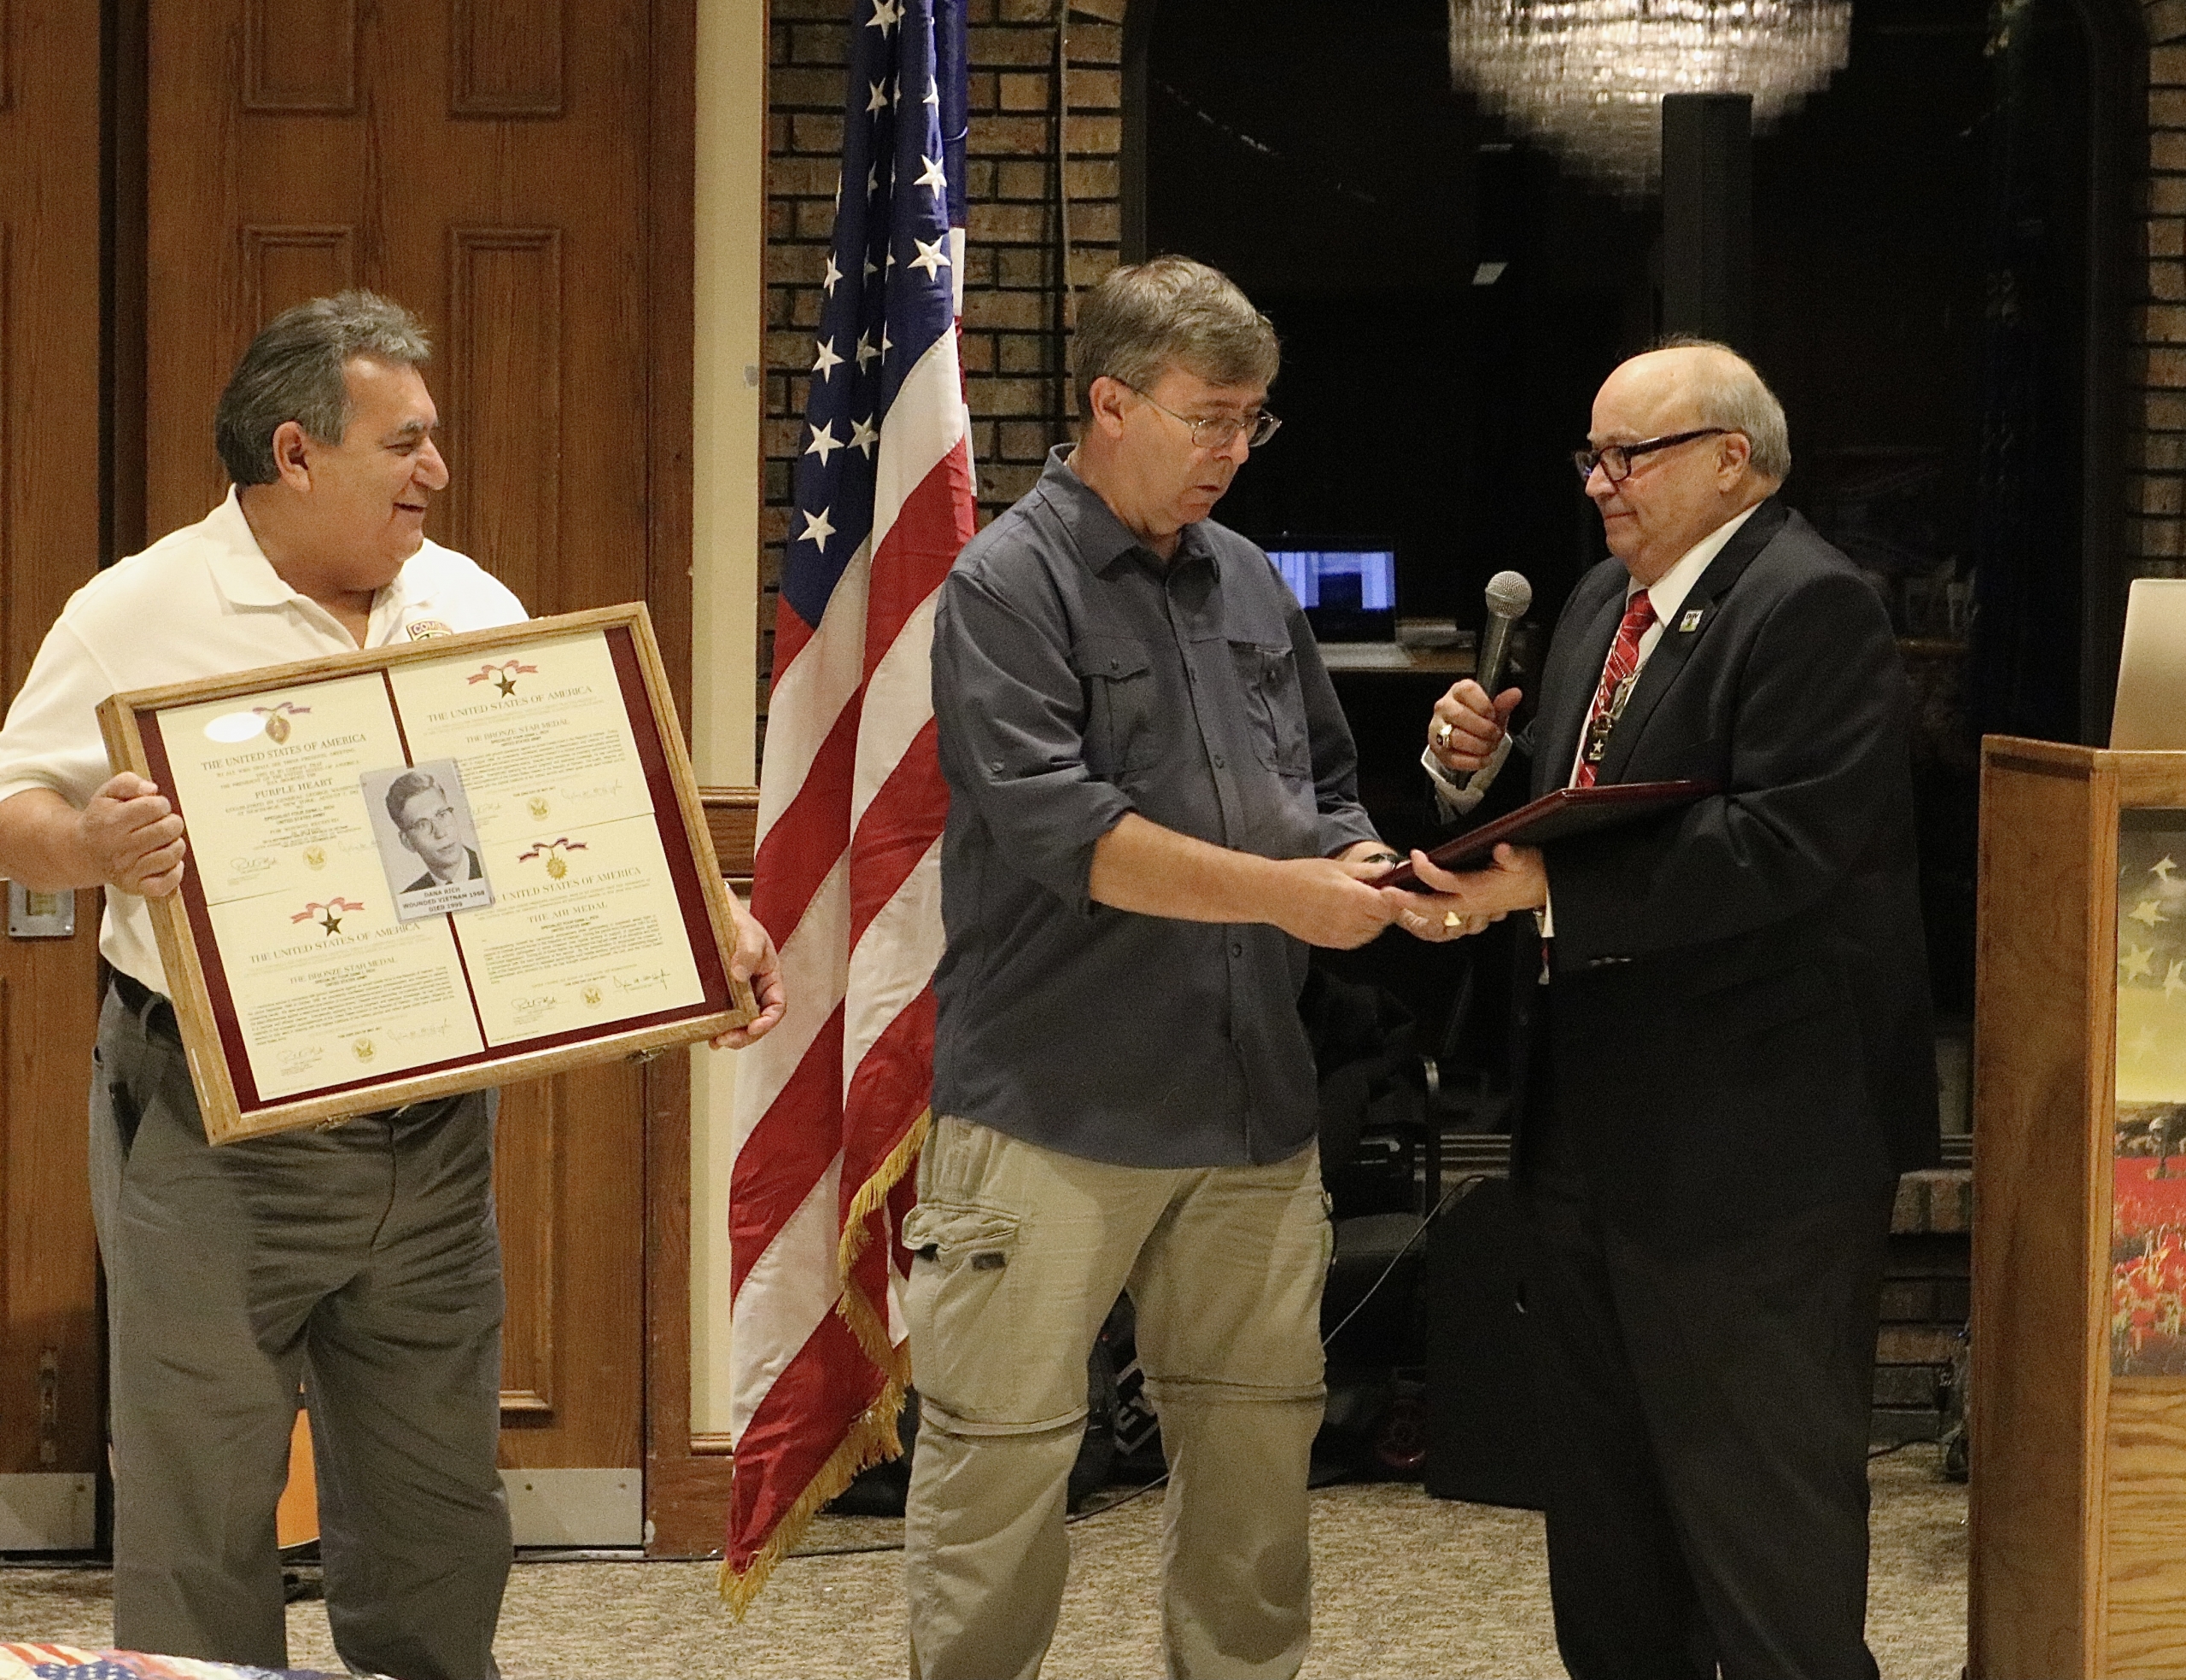 Bob Carnagey, Senior Vice Commander of the Disabled American Veterans (DAV) Department of Indiana presents LCHS teacher Tom Clark with an Americanism Award for his work in keeping the spirit of Vietnam Veterans alive. Also, in the picture is fellow veteran and Dyer Central graduate Anthony Gutierrez.